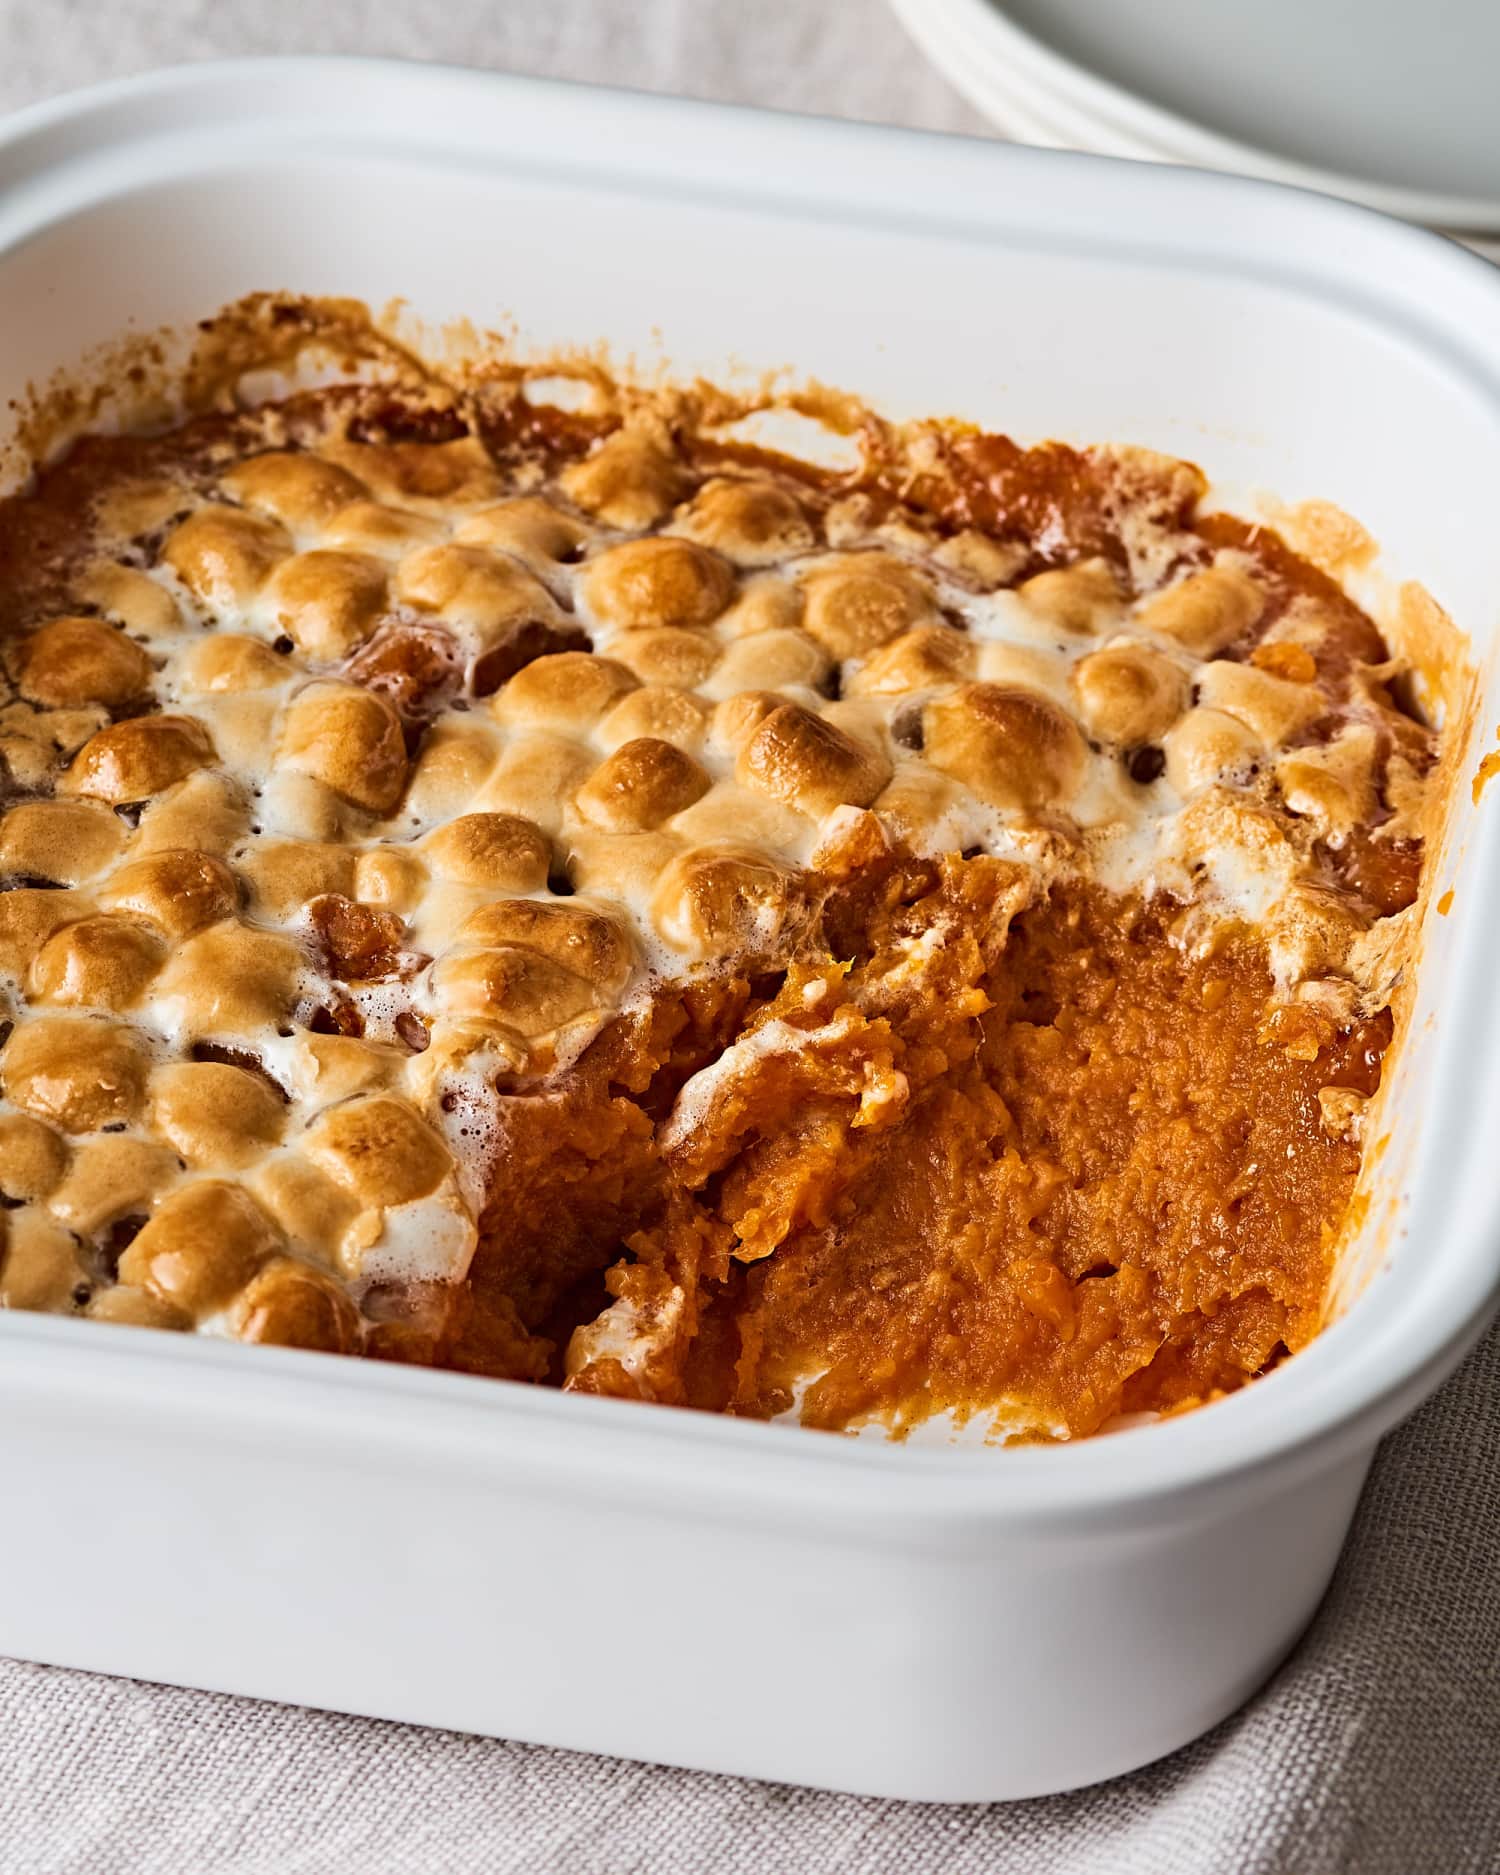 The Simple Trick for Making the Best Sweet Potato Casserole | Kitchn